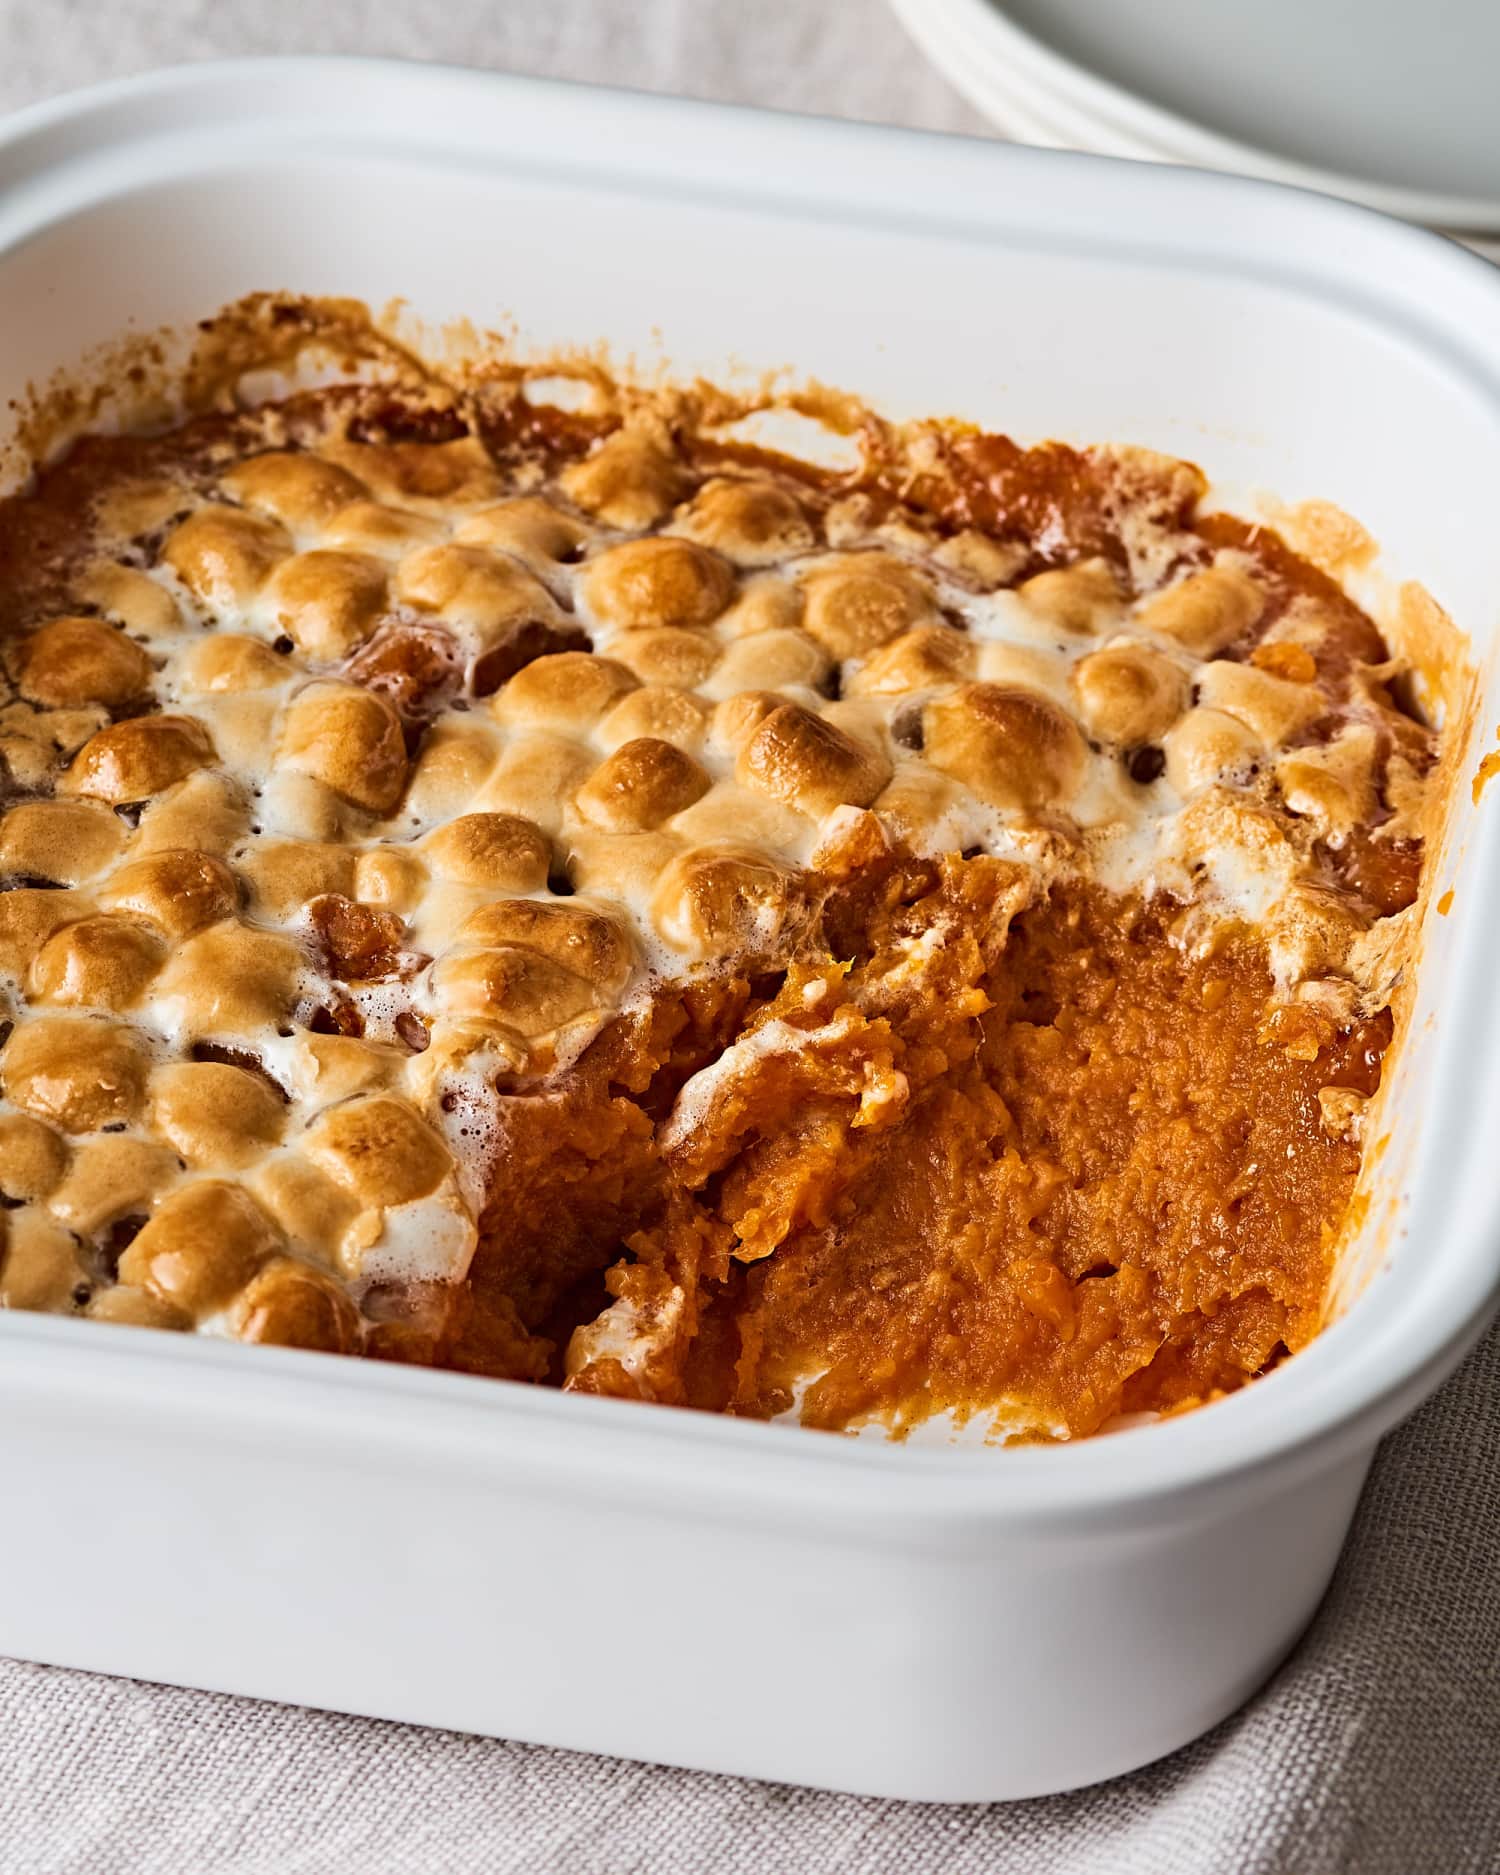 The Simple Trick for Making the Best Sweet Potato Casserole | Kitchn